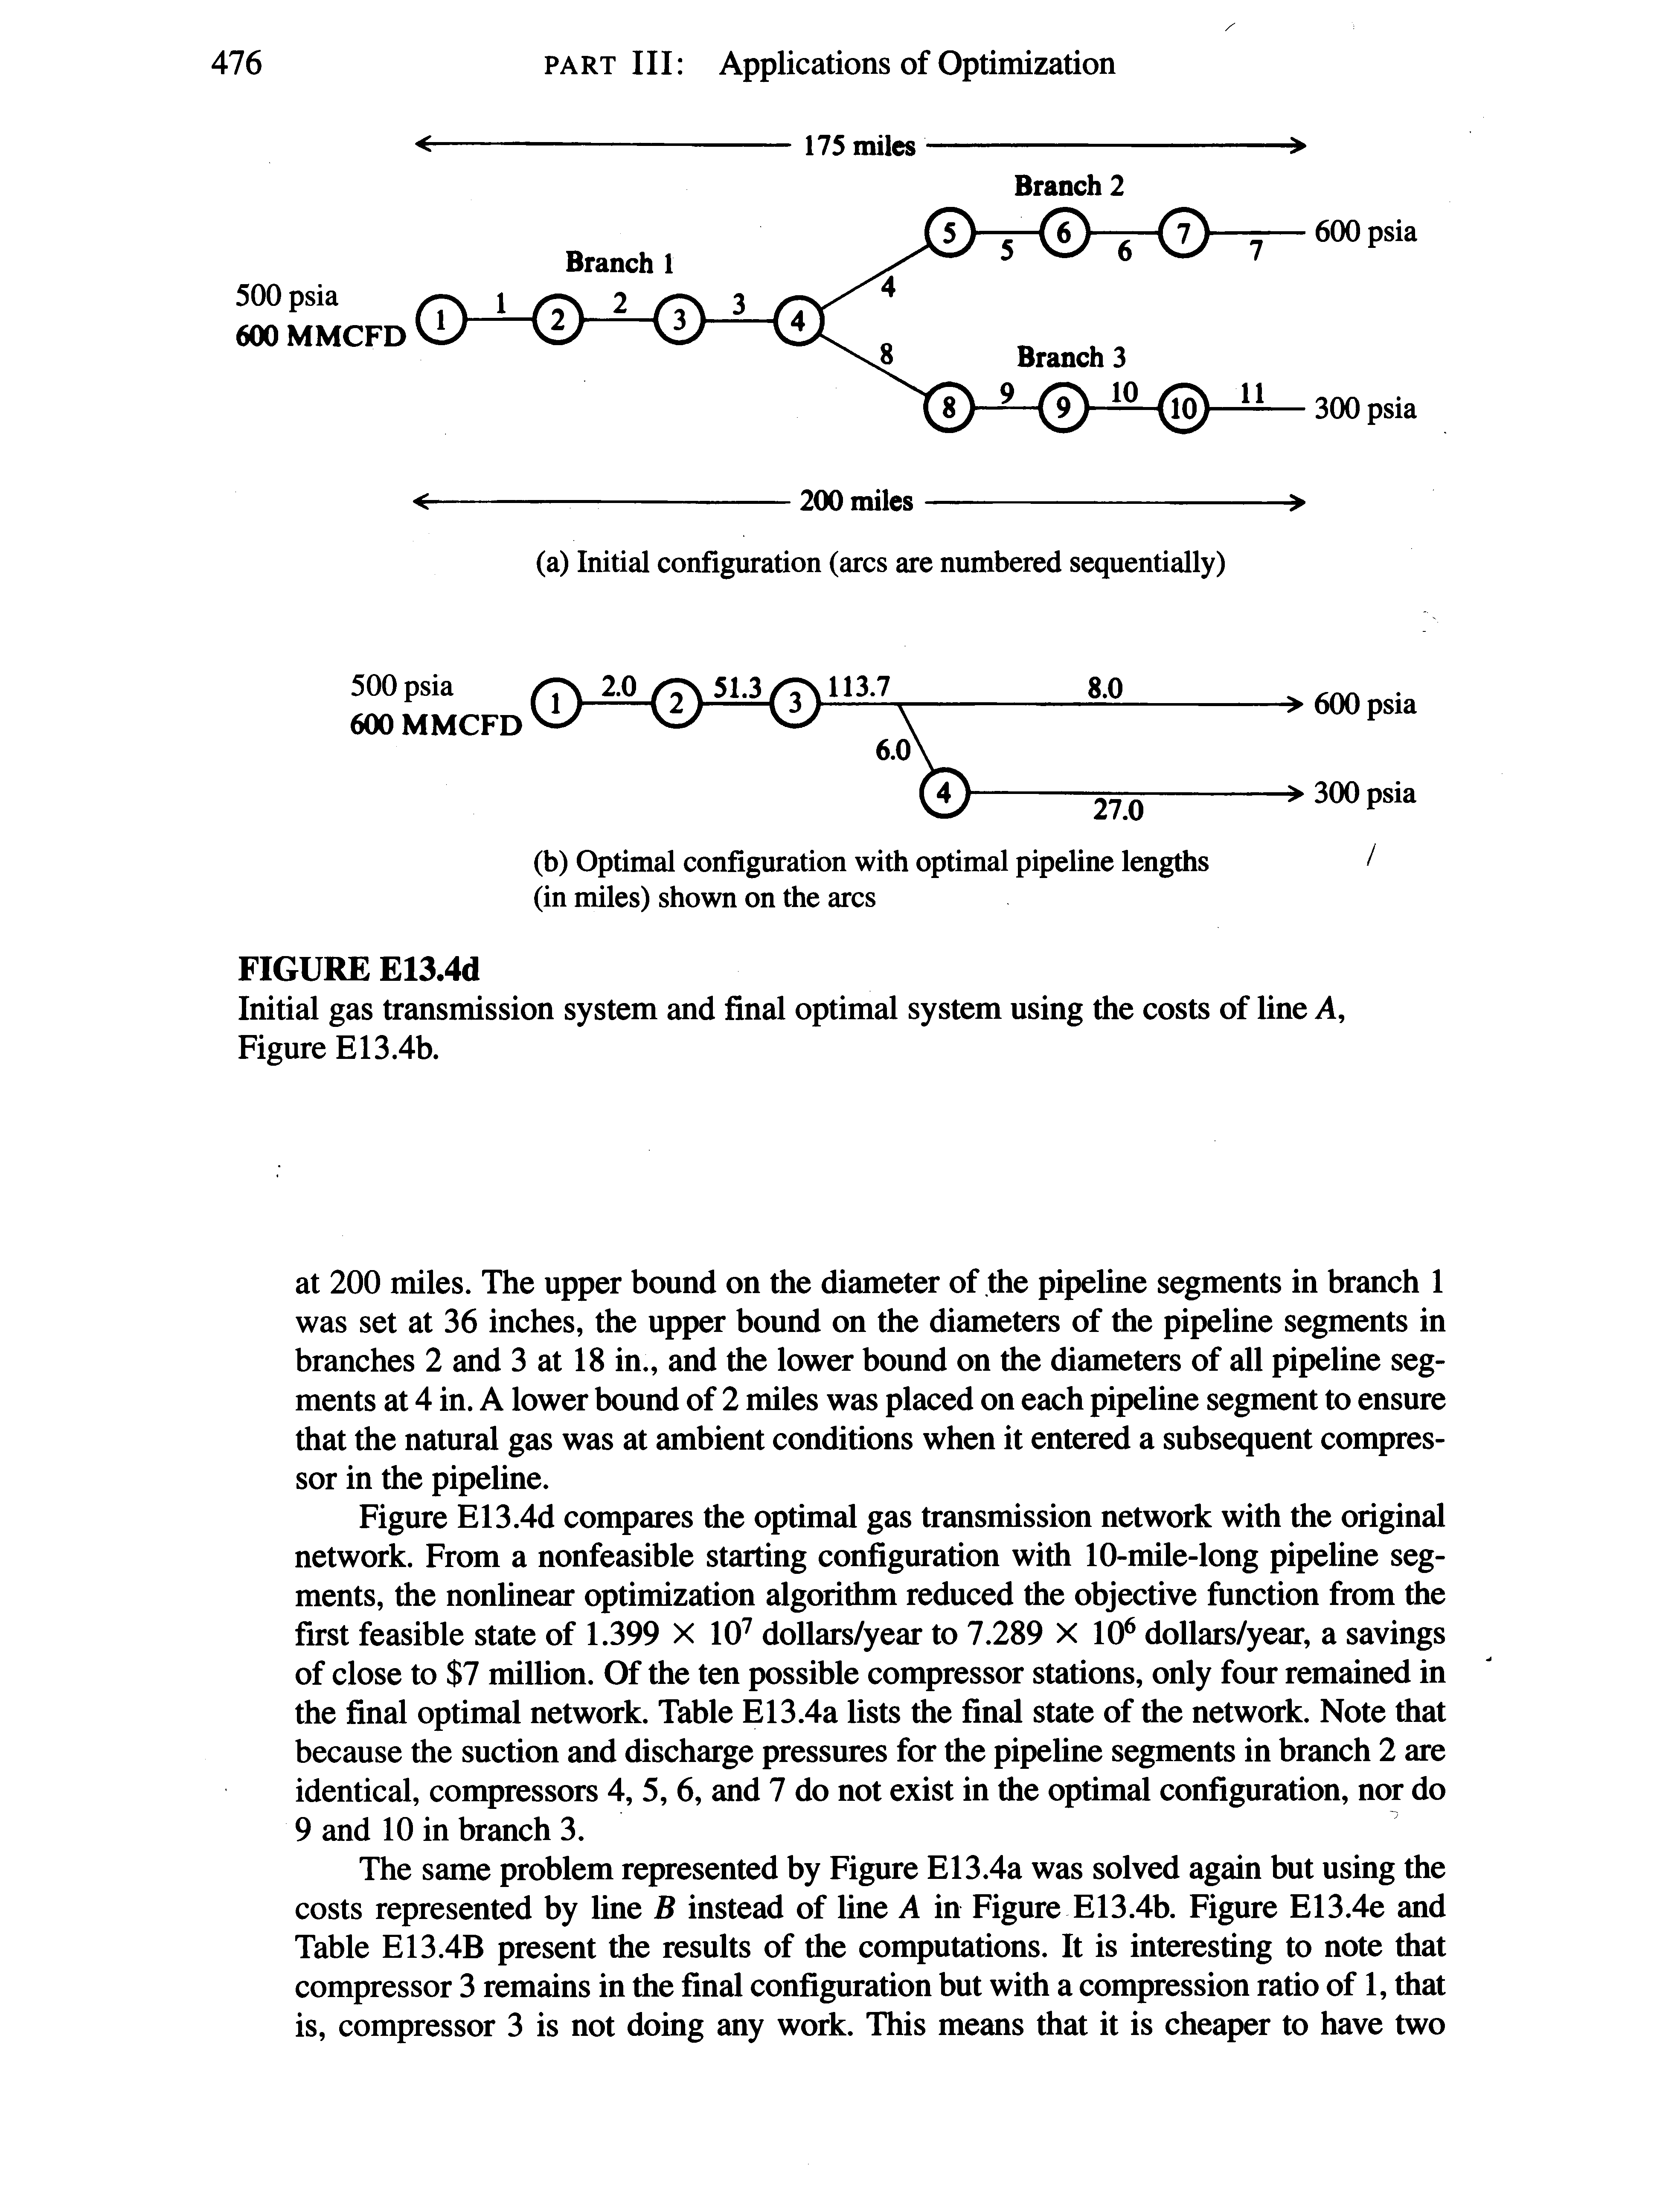 Figure E13.4d compares the optimal gas transmission network with the original network. From a nonfeasible starting configuration with 10-mile-long pipeline segments, the nonlinear optimization algorithm reduced the objective function from the first feasible state of 1.399 X 107 dollars/year to 7.289 X 106 dollars/year, a savings of close to 7 million. Of the ten possible compressor stations, only four remained in the final optimal network. Table E13.4a lists the final state of the network. Note that because the suction and discharge pressures for the pipeline segments in branch 2 are identical, compressors 4, 5, 6, and 7 do not exist in the optimal configuration, nor do 9 and 10 in branch 3.